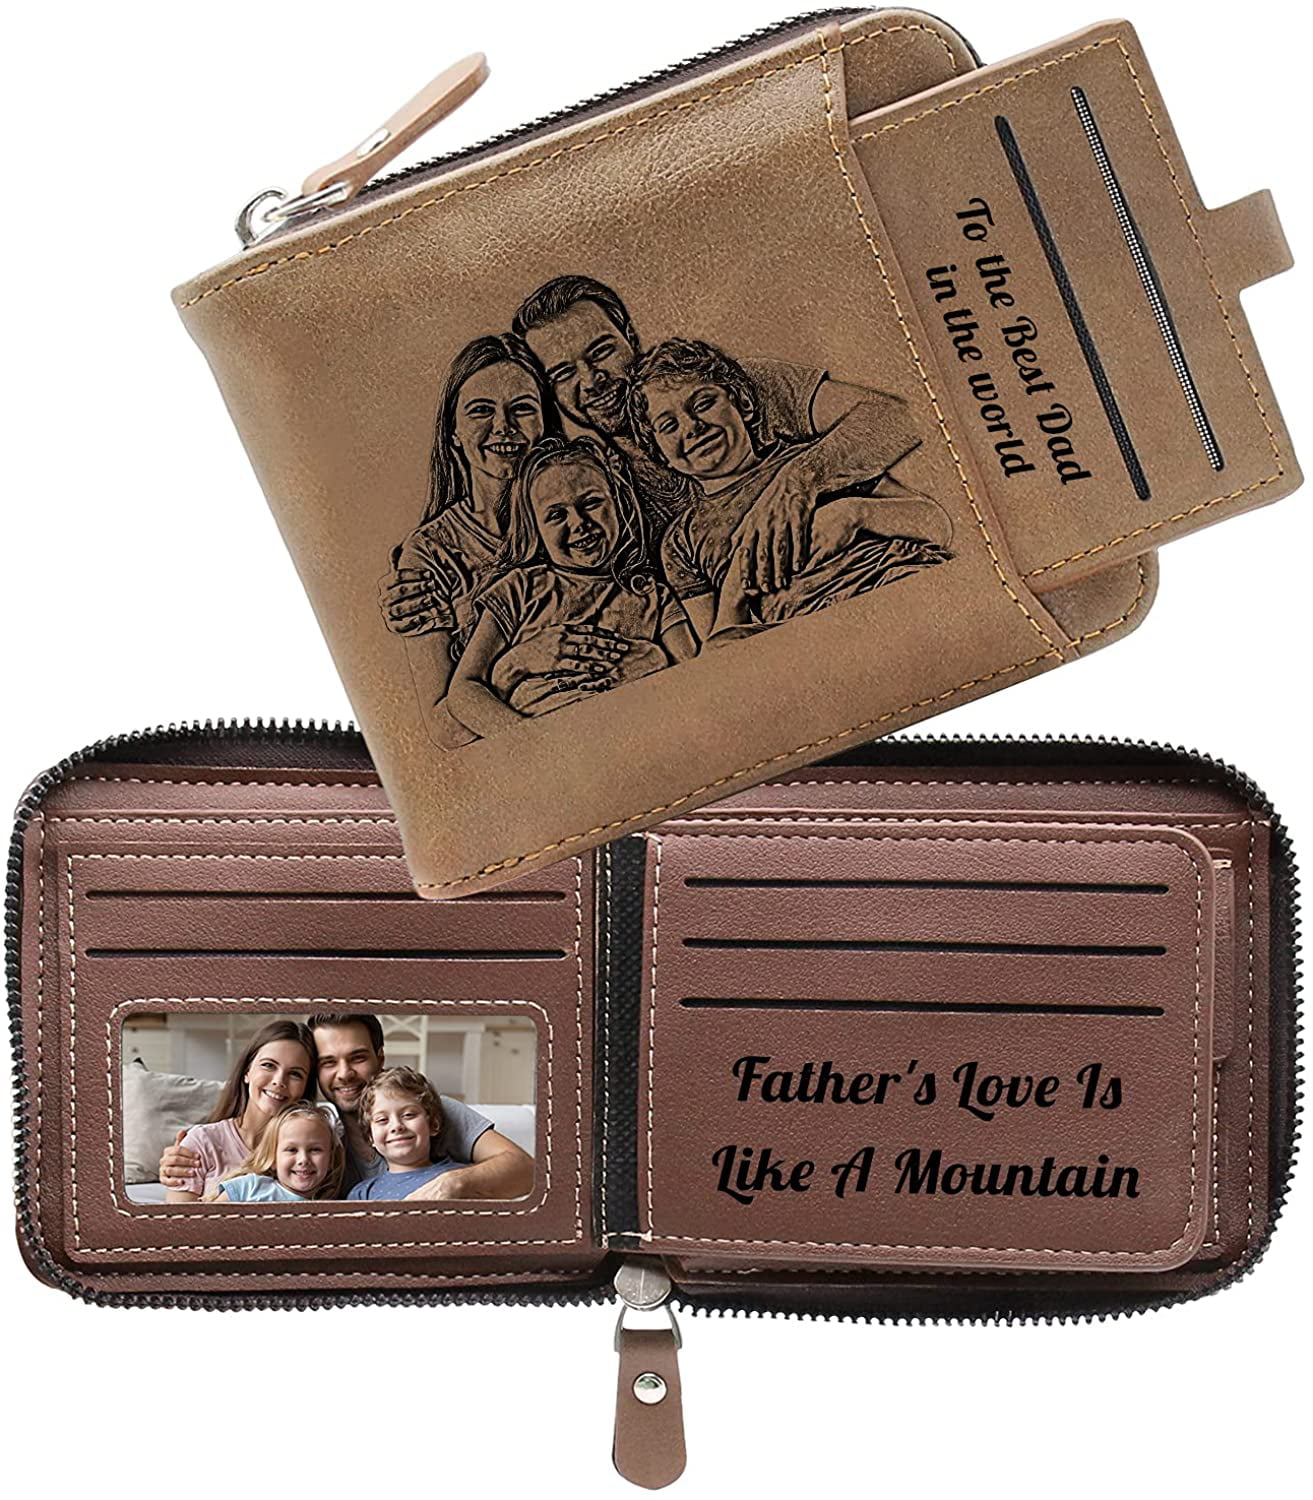 Genuine Soft PU Leather Custom Wallet Bags & Purses Wallets & Money Clips Wallets Personalised Engraved Mens Wallet Ideal Gift for Him Personalized Gift Father's Day Gift for Dad 